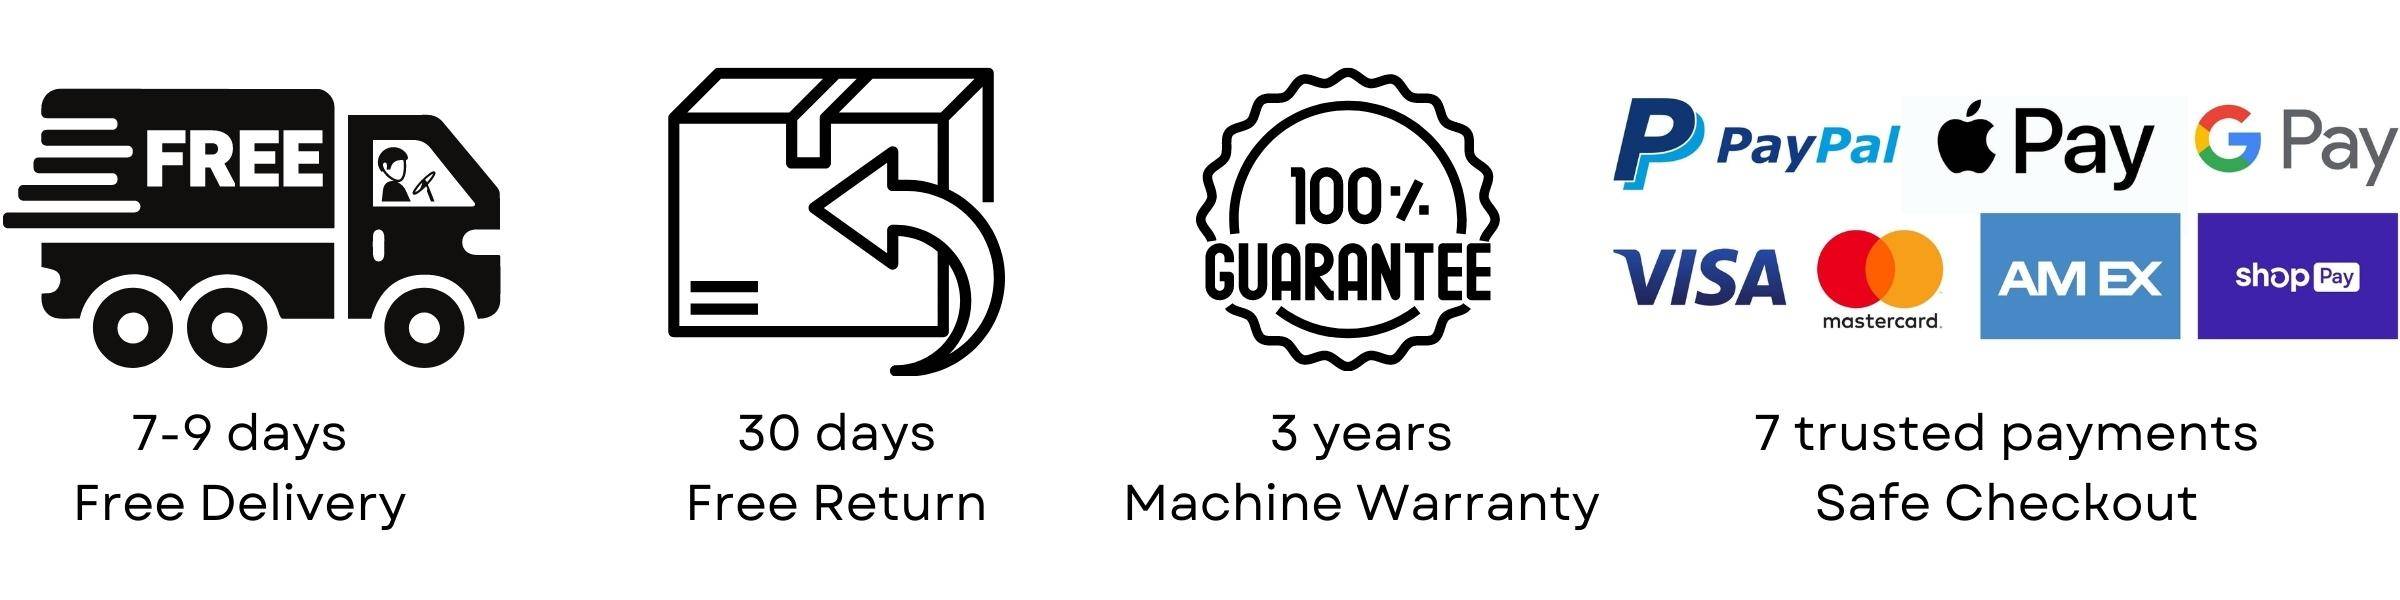 Free shipping in the United States 30-day return, 36-month machine, 7-year cutter warranty Guaranteed safe checkout with Paypal and other trusted payments Specialized in manufacturing paper shredders since 2005